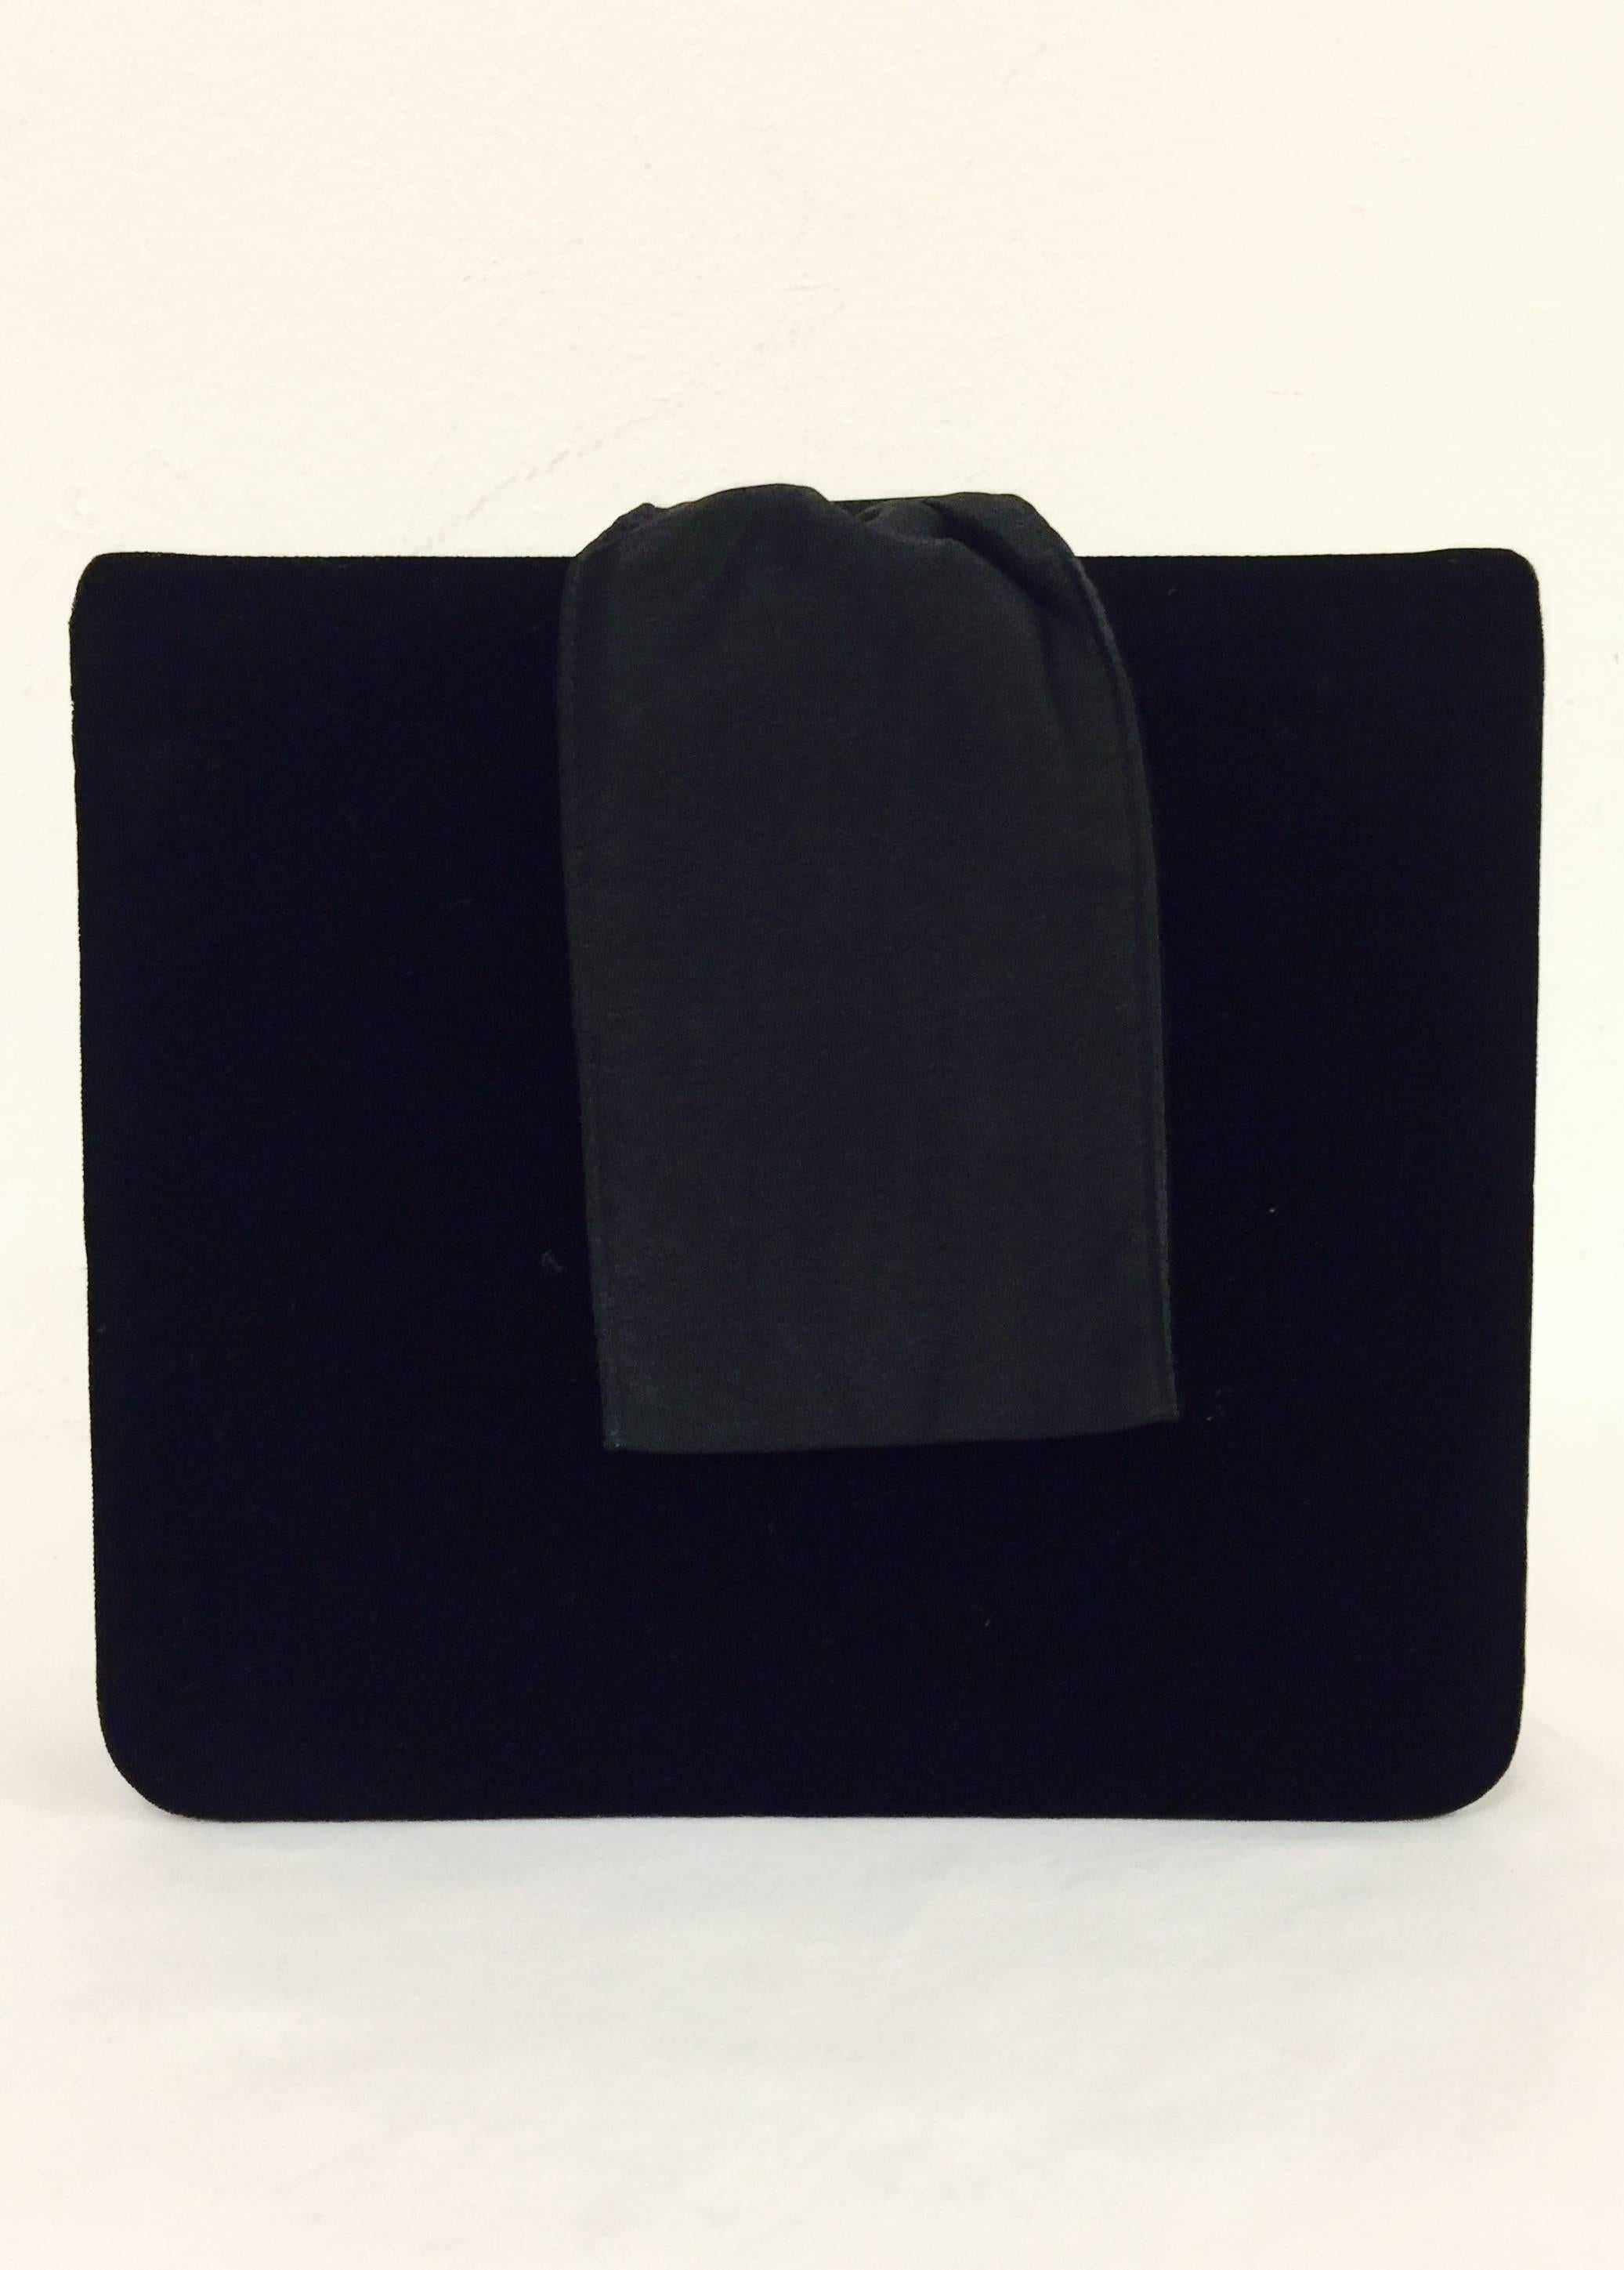 Paloma Picasso Black Velvet Convertible Evening Clutch With Black Satin Bow In Excellent Condition In Palm Beach, FL